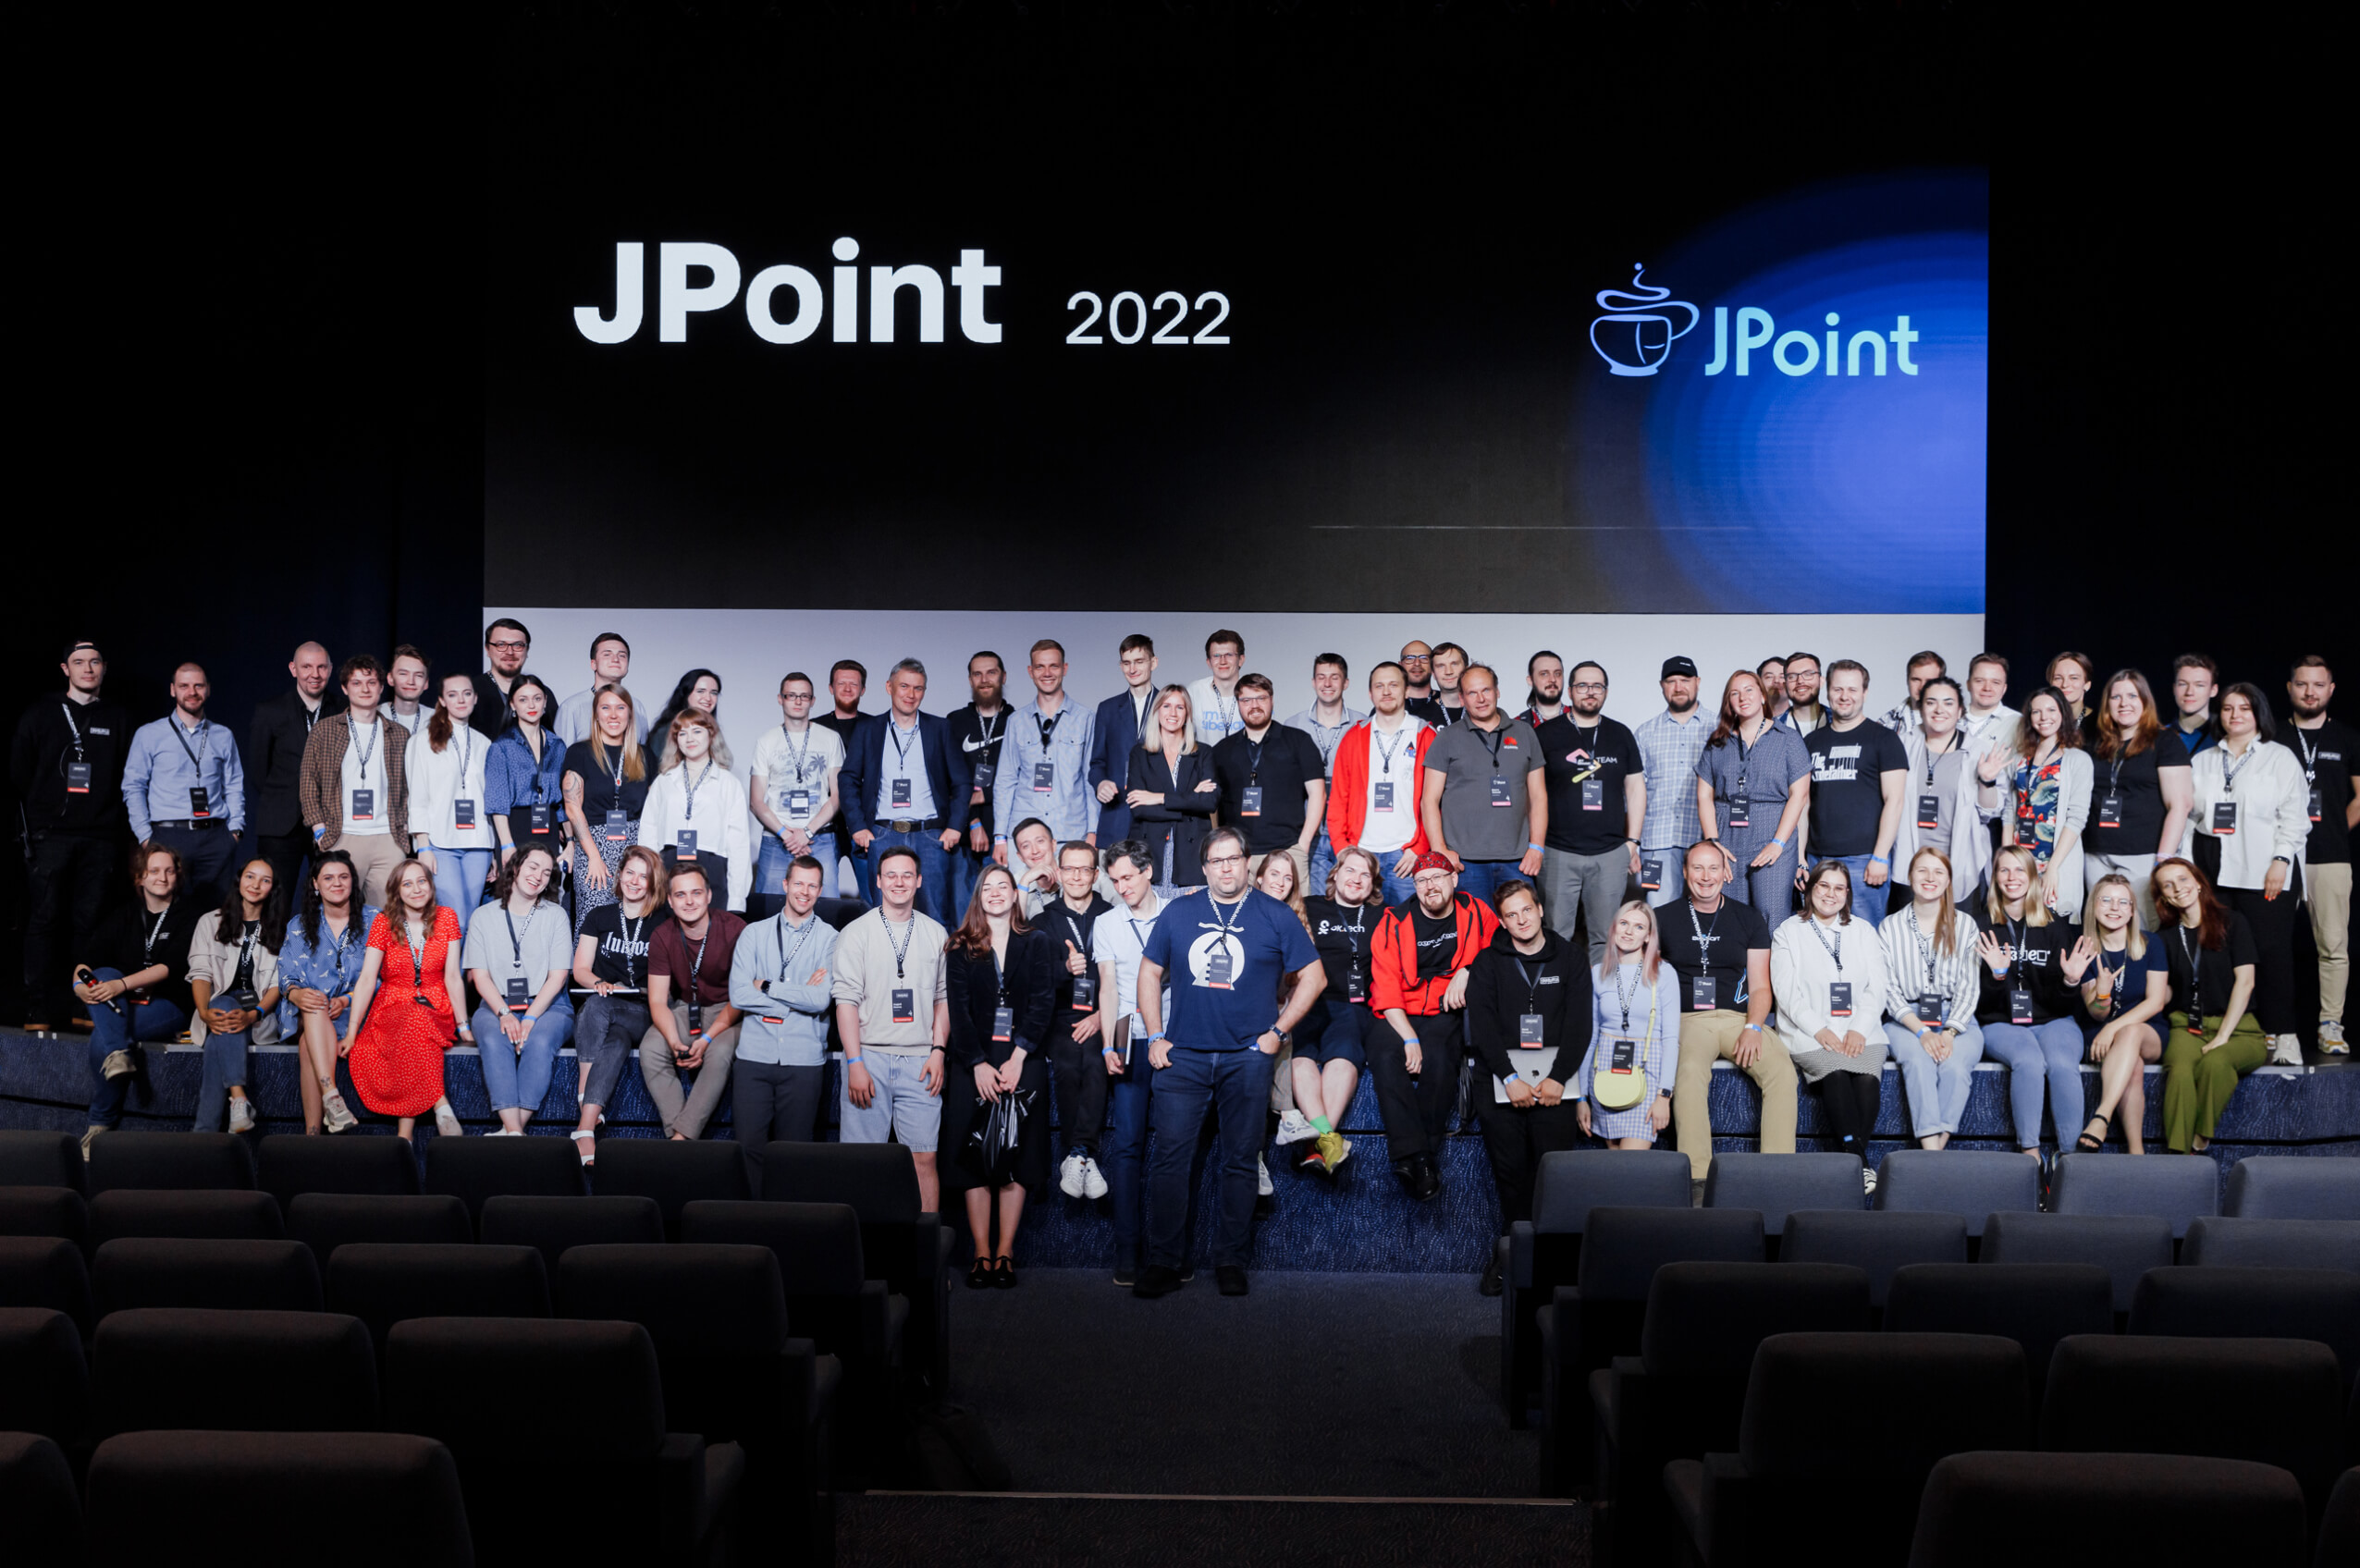 JUG Ru Group team on stage at JPoint 2022 conference